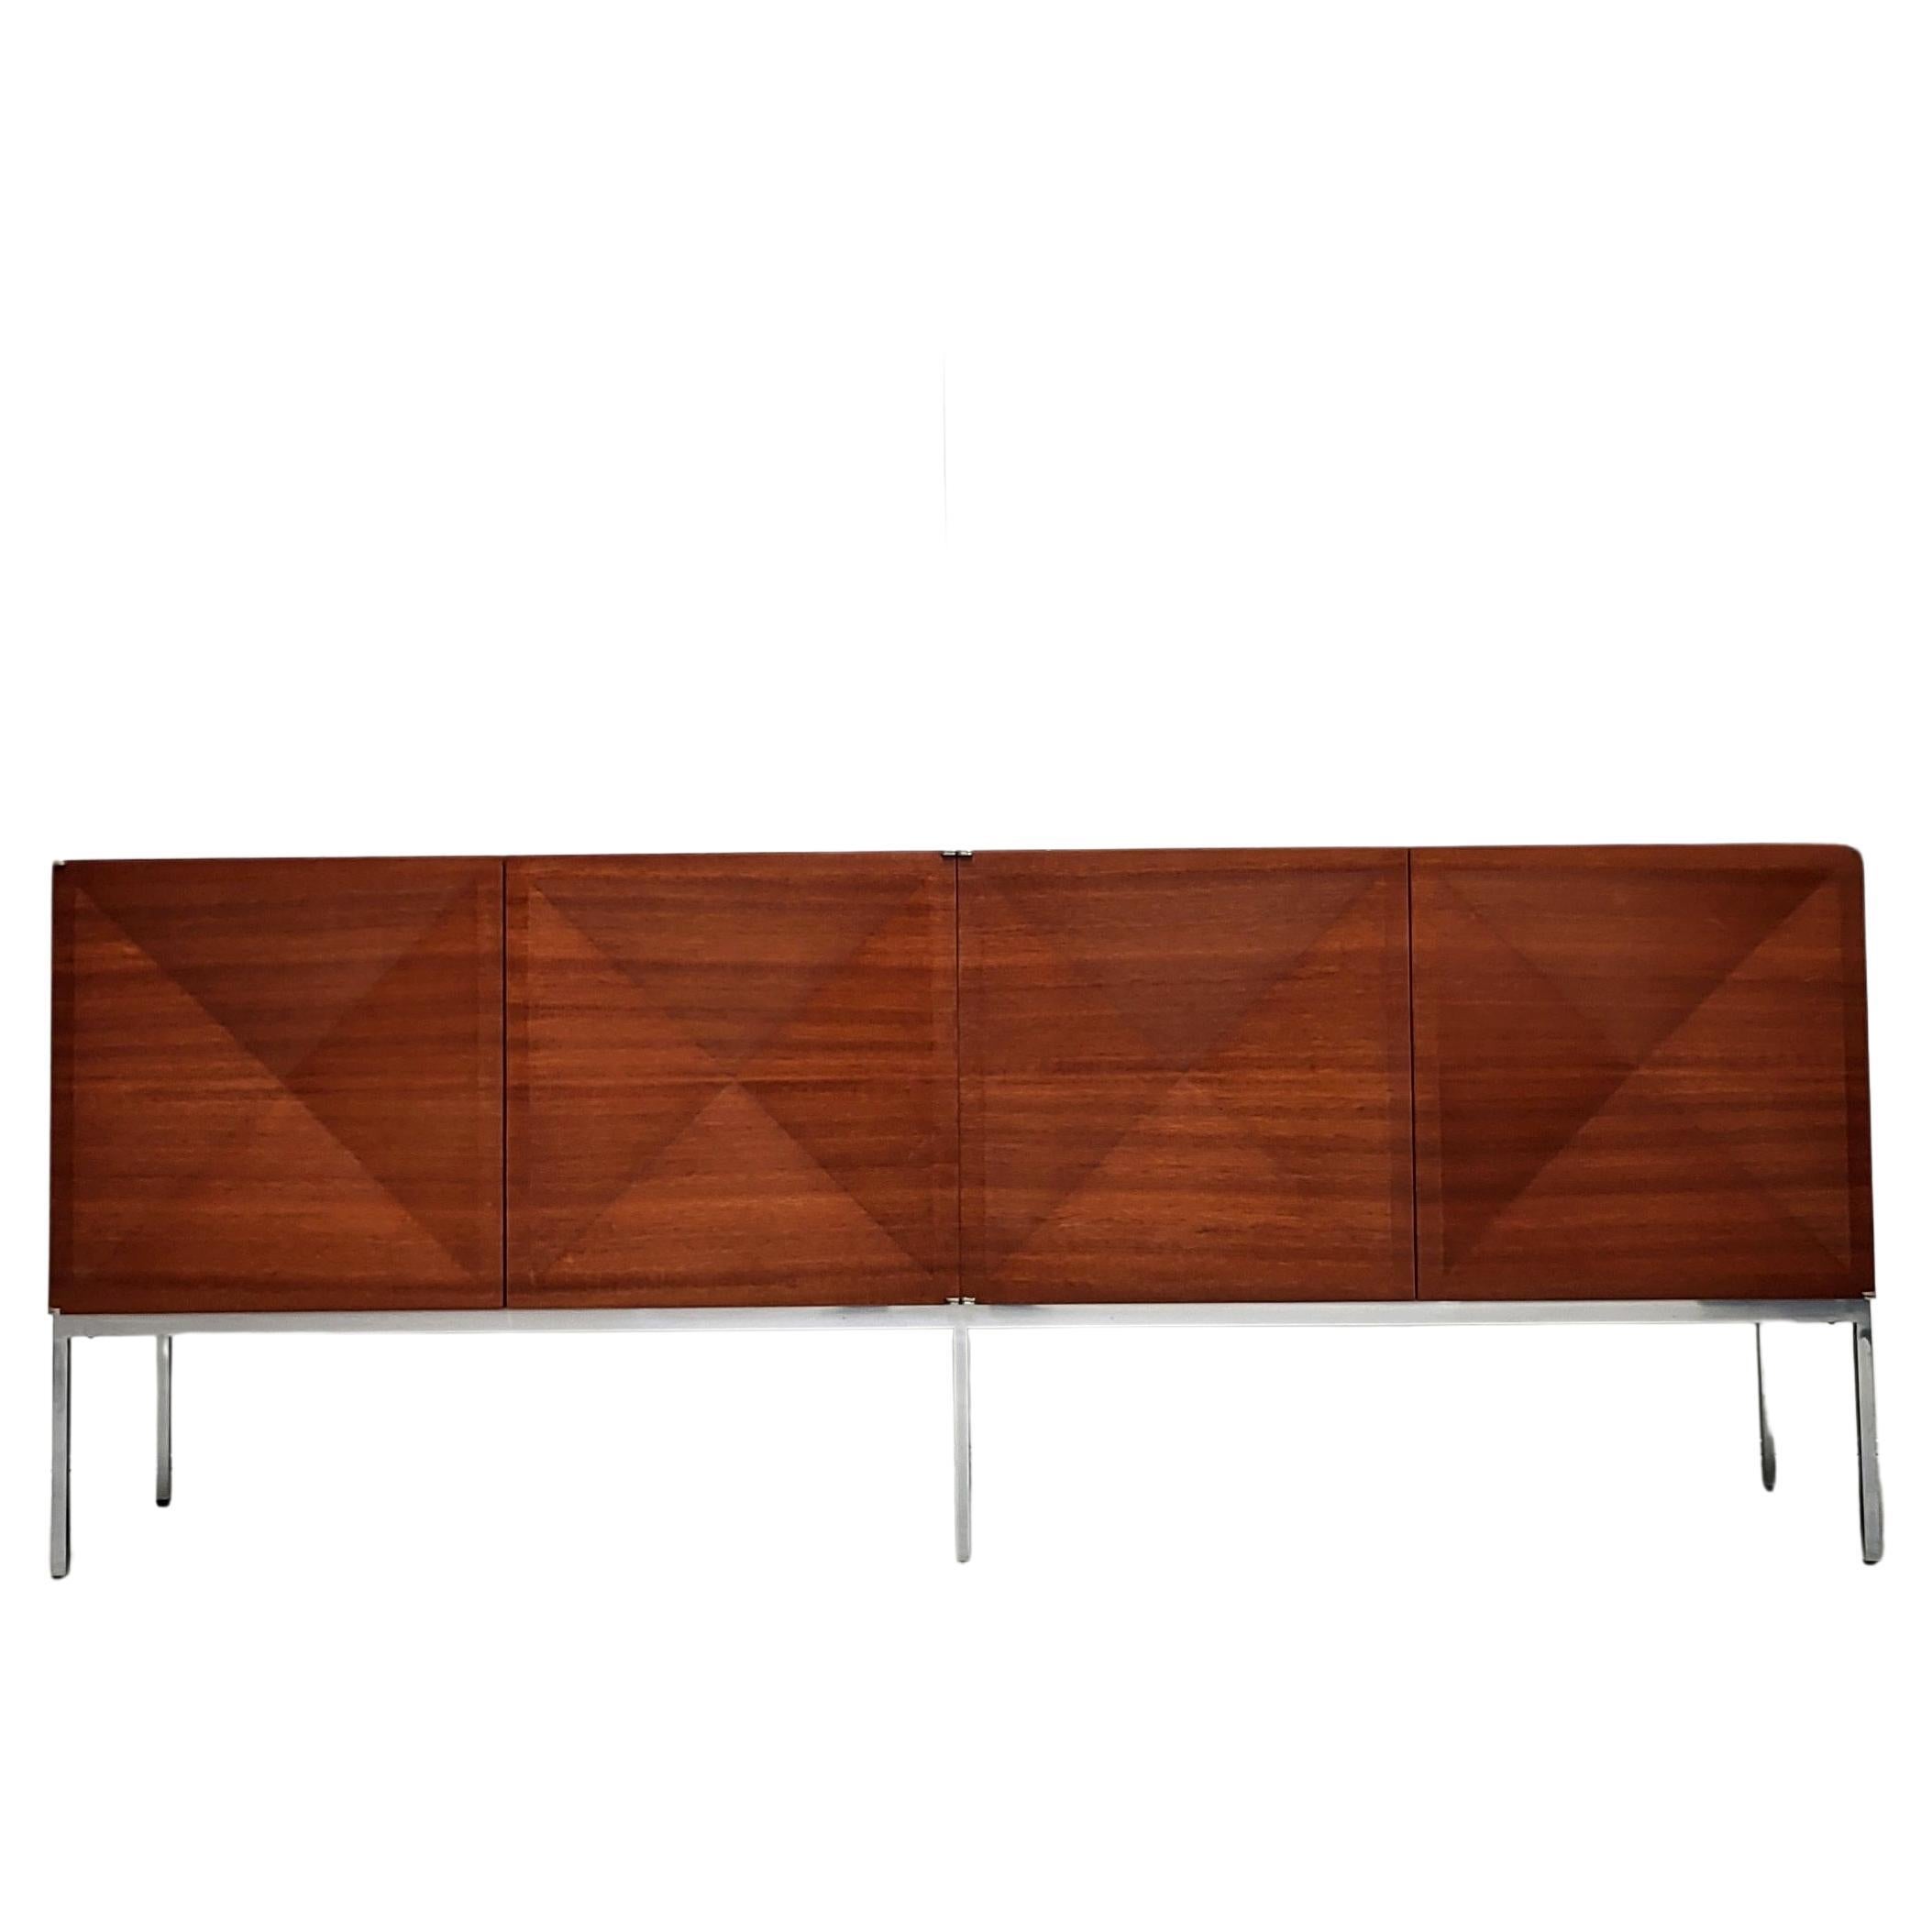 A. Philippon & J. Lecoq Pointe de Diamant Sideboard Credenza by Behr 1962 For Sale